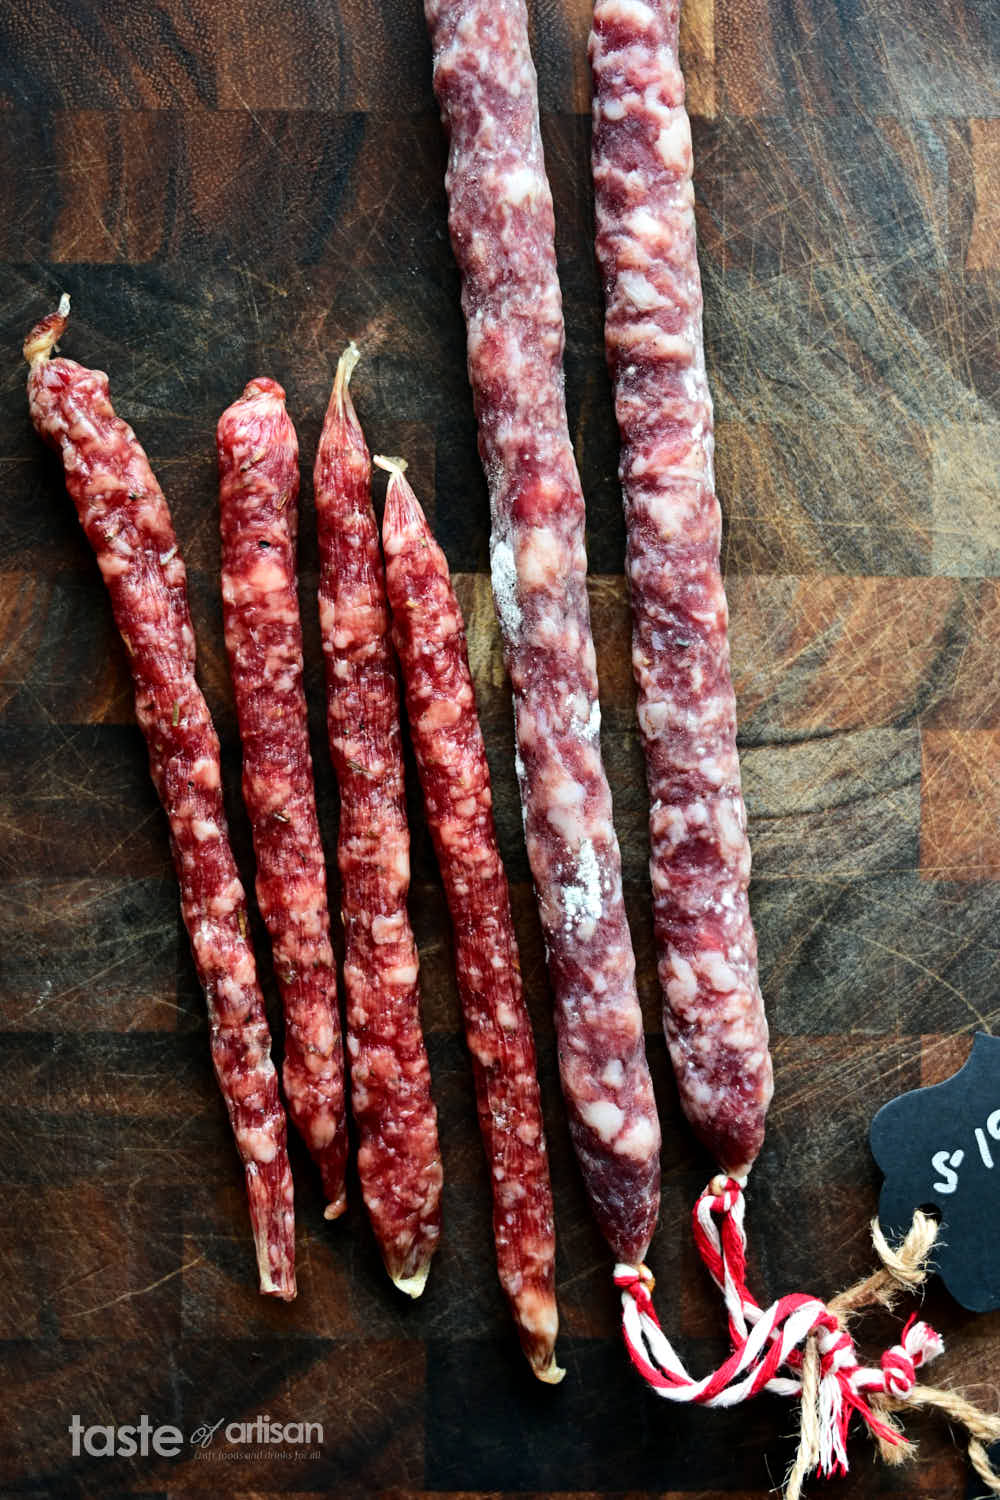 Comparing store-bought and homemade salami sticks.